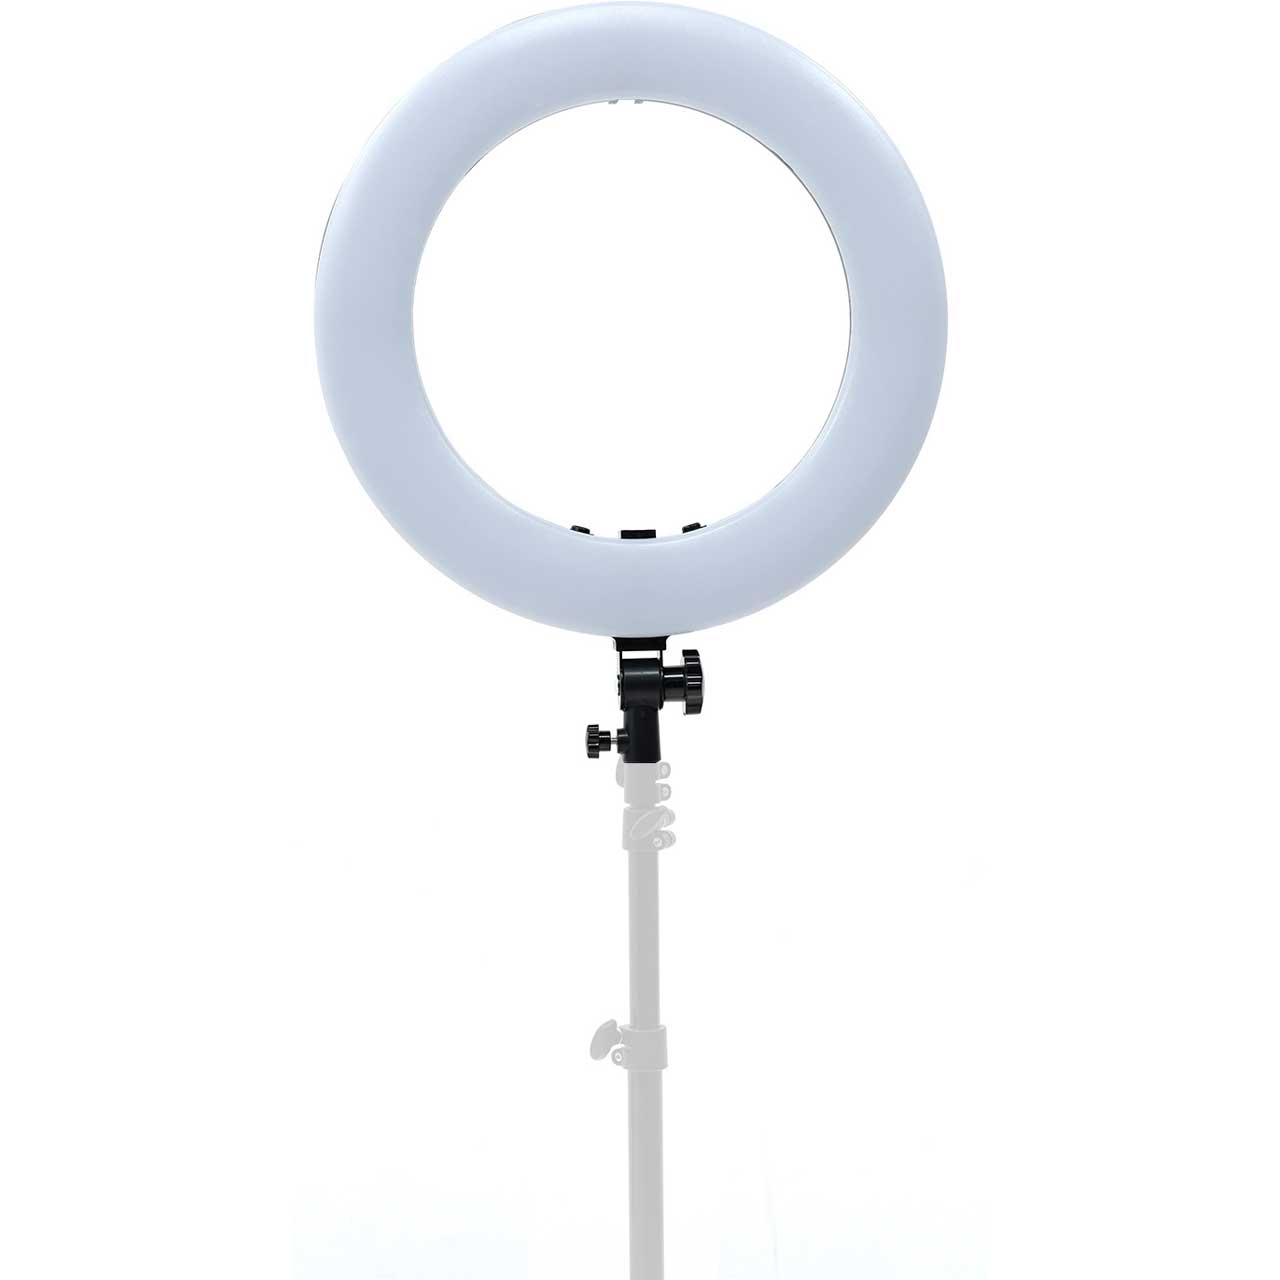 ikan RLB48-M2 Oryon 18 Inch Ring Light with Phone Mount / Remote and Bag (Version 2) IKAN-RLB48-M2